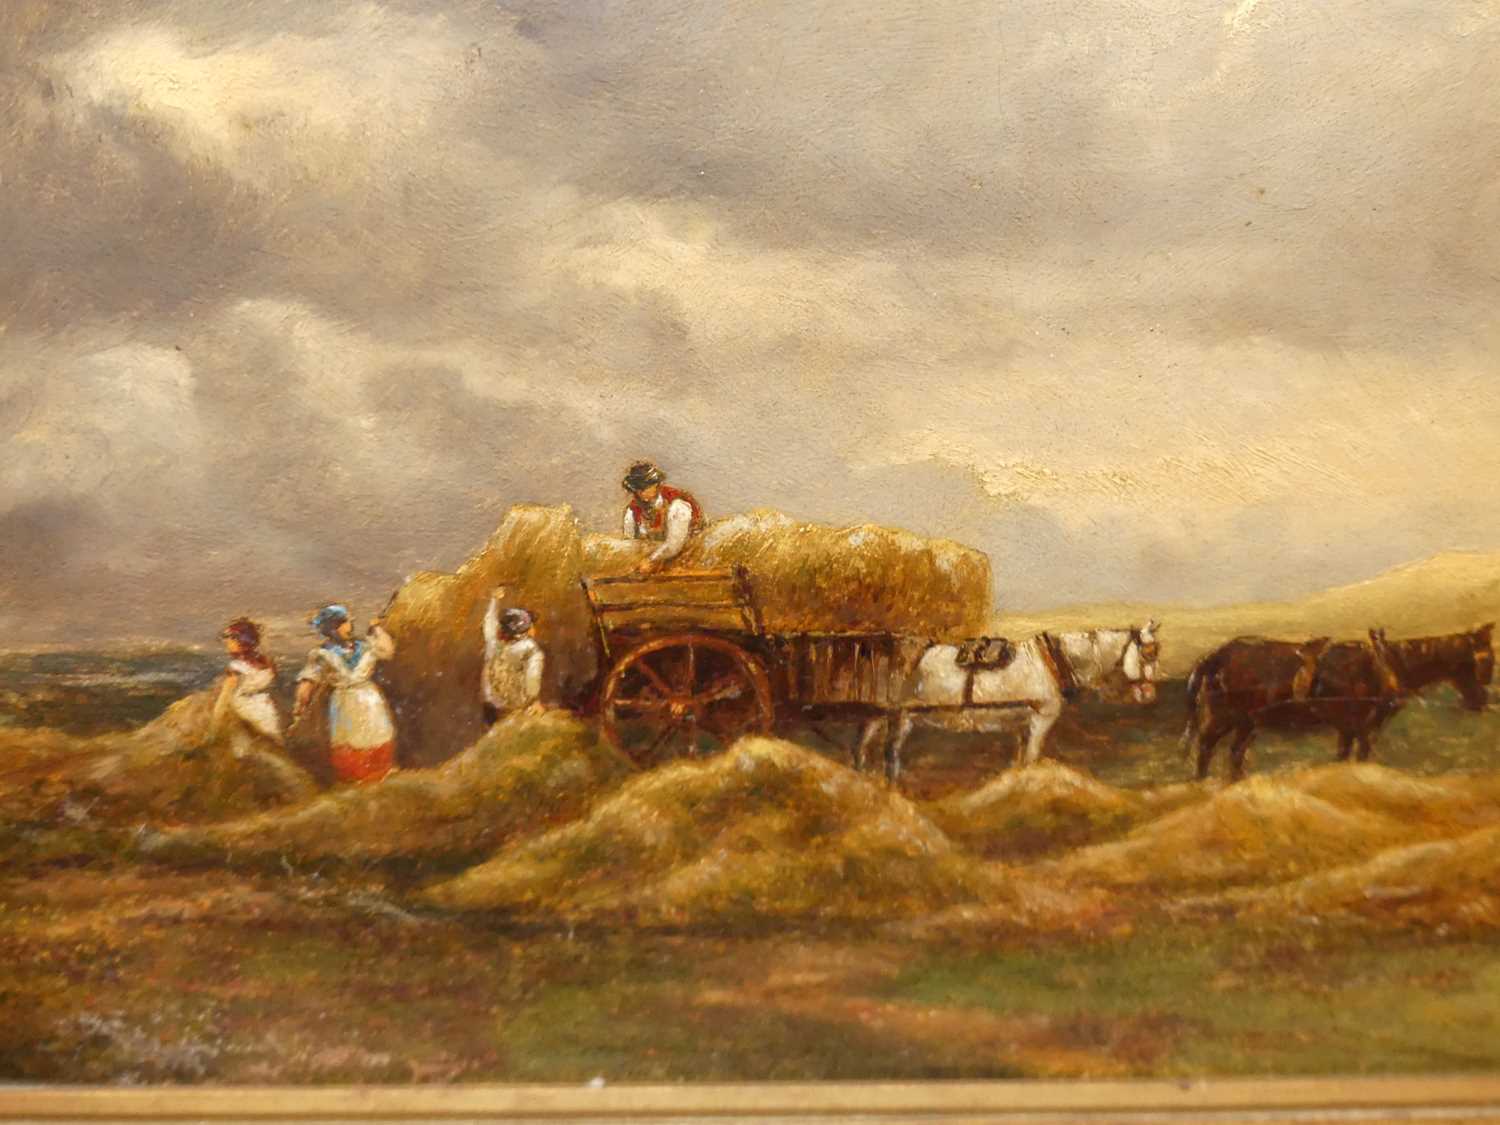 19th century English school - Loading the haycart under heavy skies, oil on canvas, 35 x 51cm - Image 3 of 14